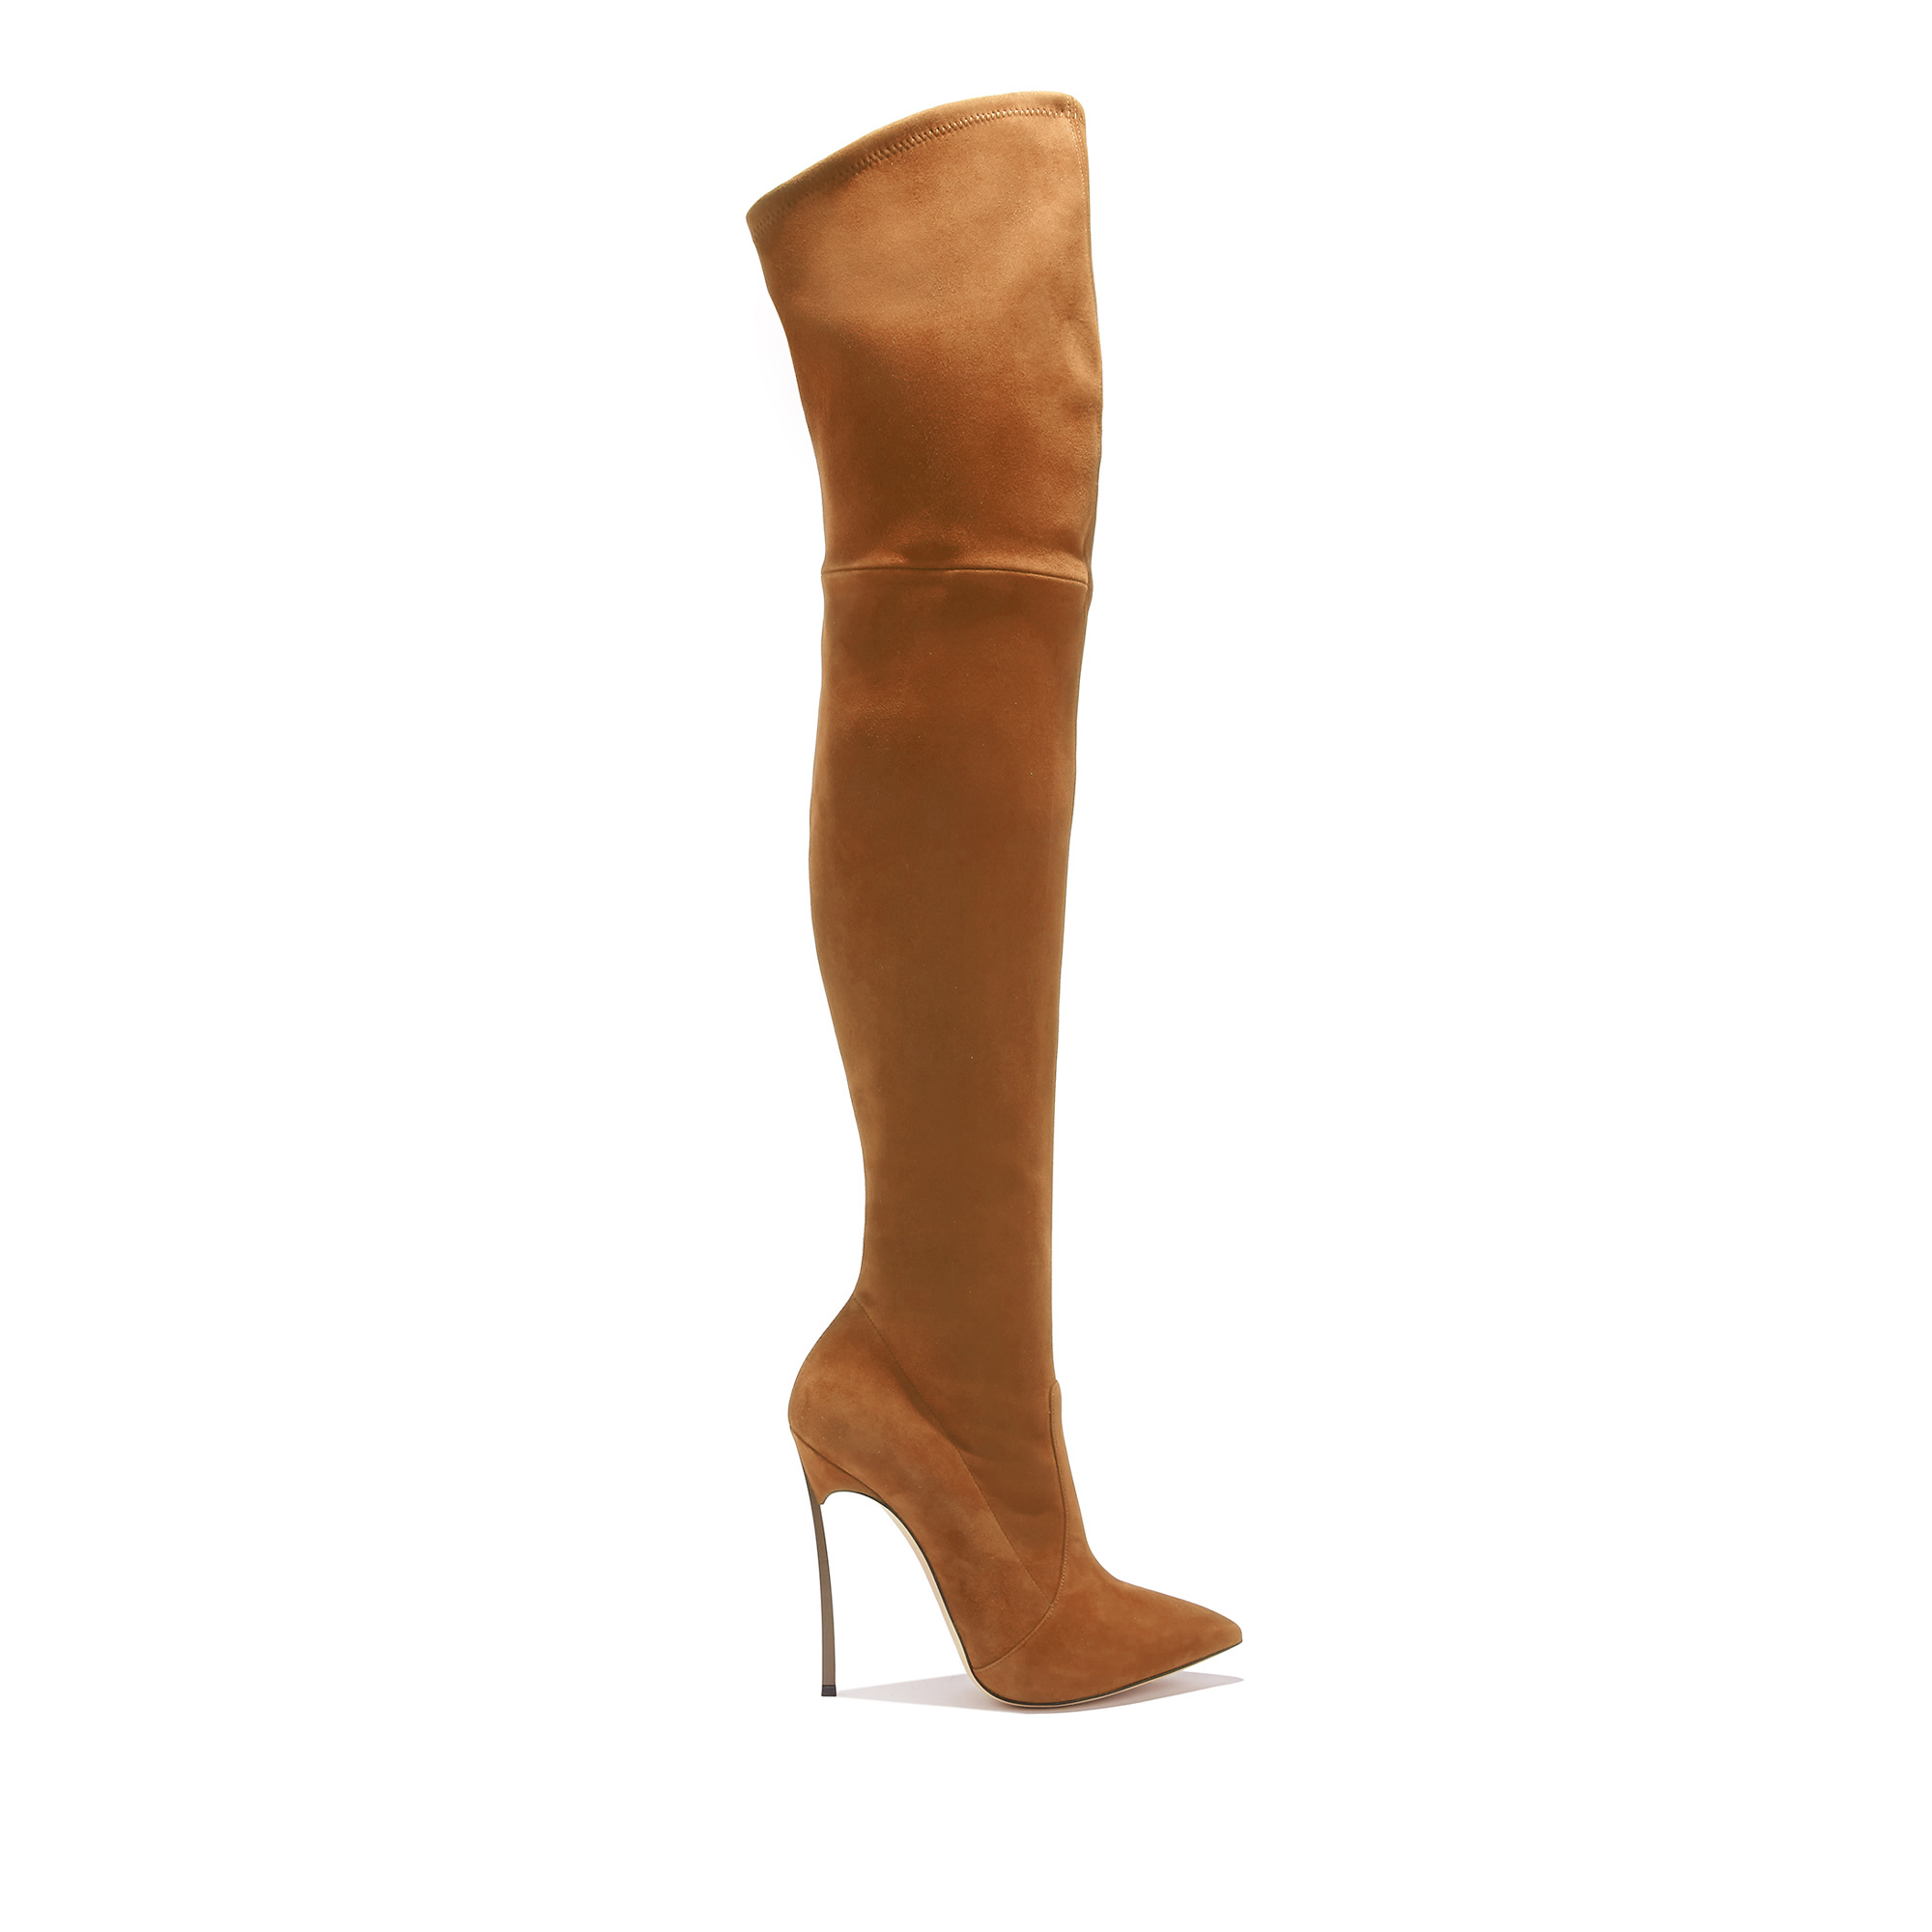 CASADEI CASADEI BLADE SUEDE OVER THE KNEE - WOMAN OVER THE KNEE BOOTS RODEO 37